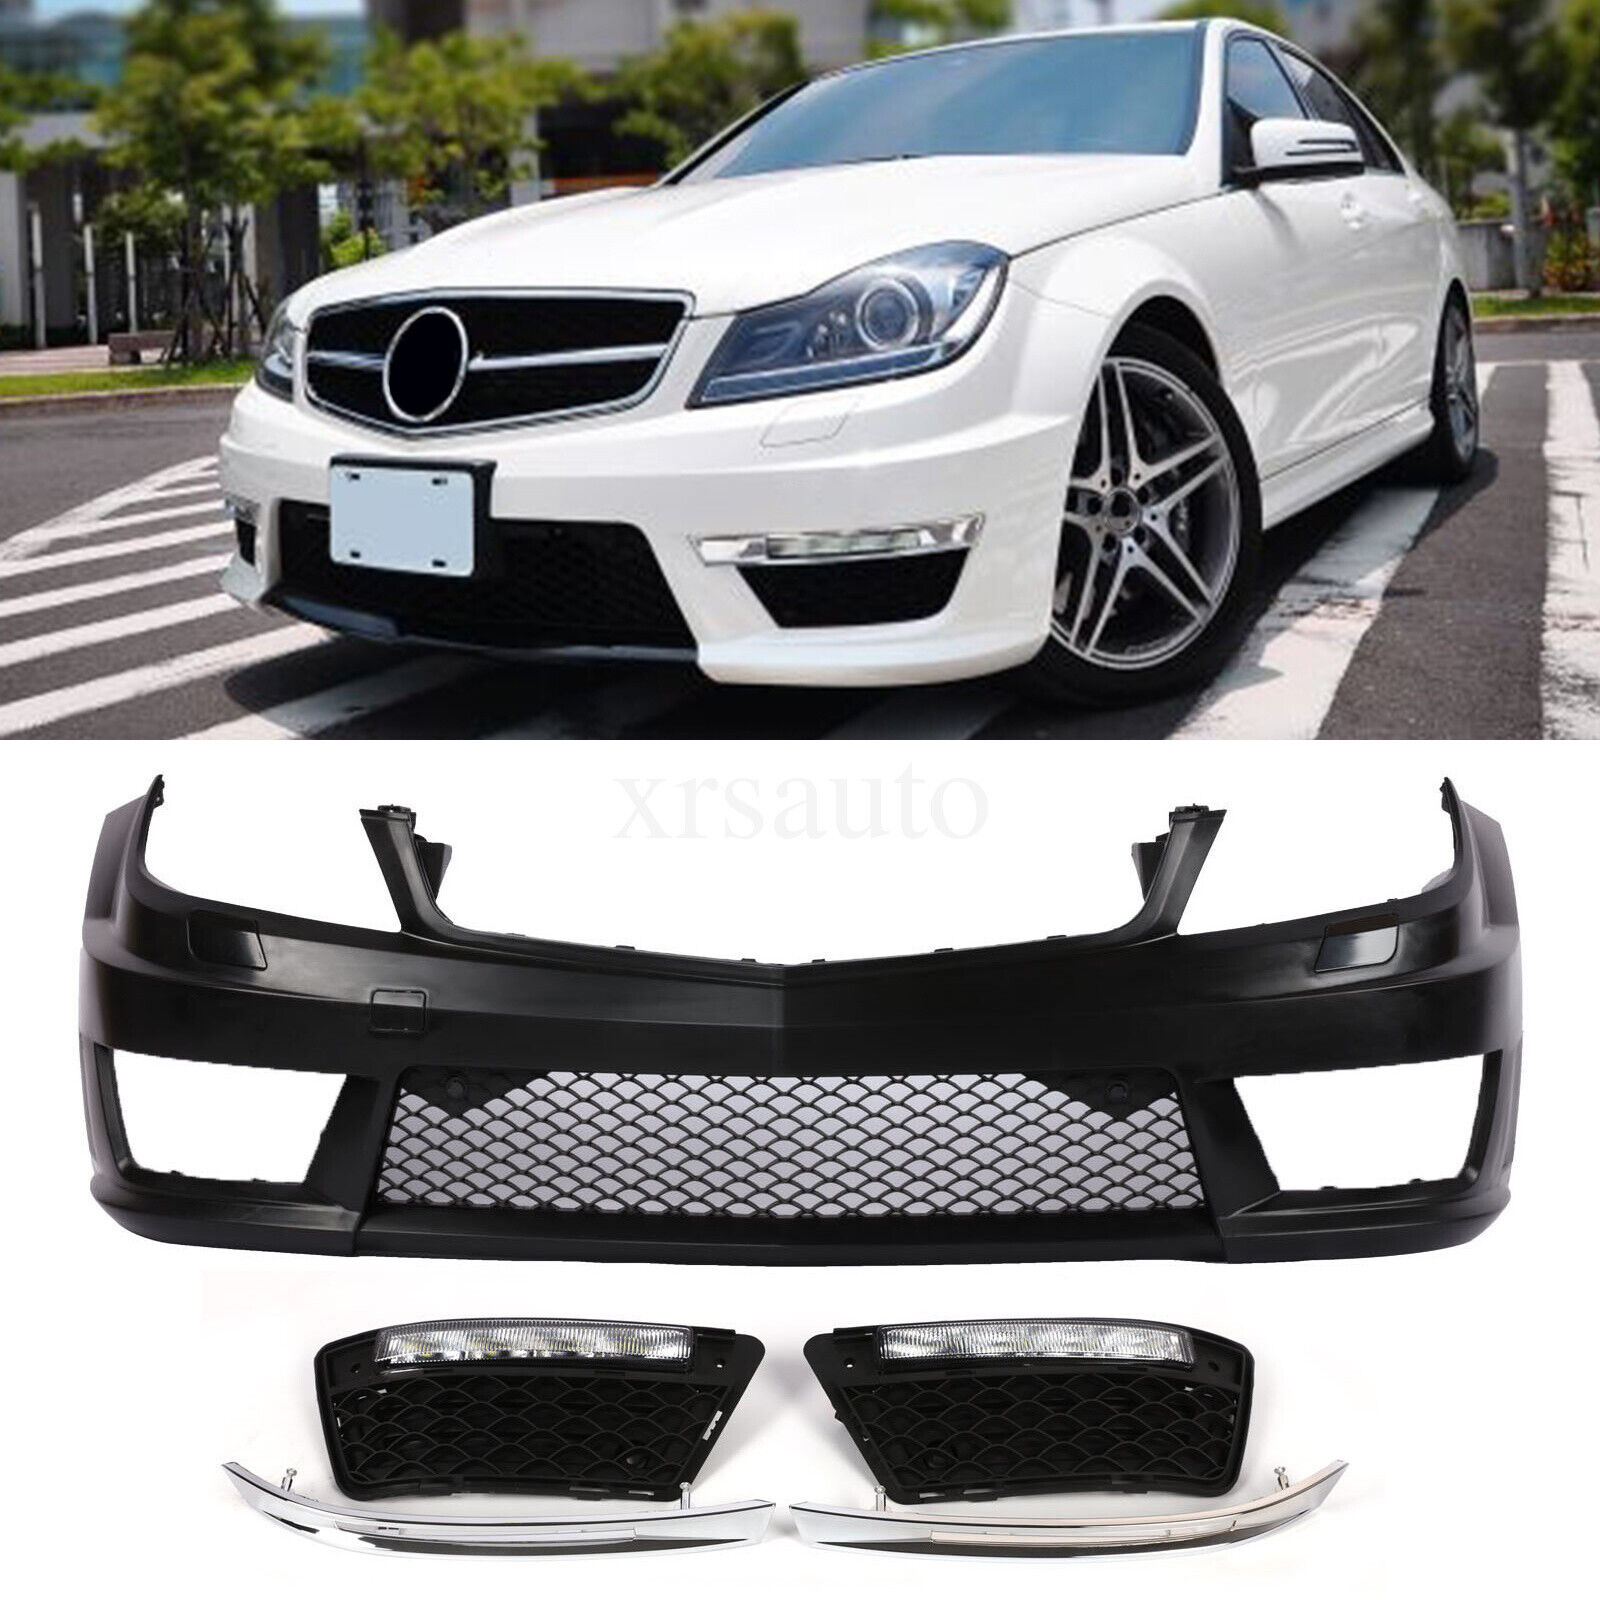 C63 AMG Style Front Bumper kit W/DRL W/o PDC For Mercedes C-Class W204 C250 C300